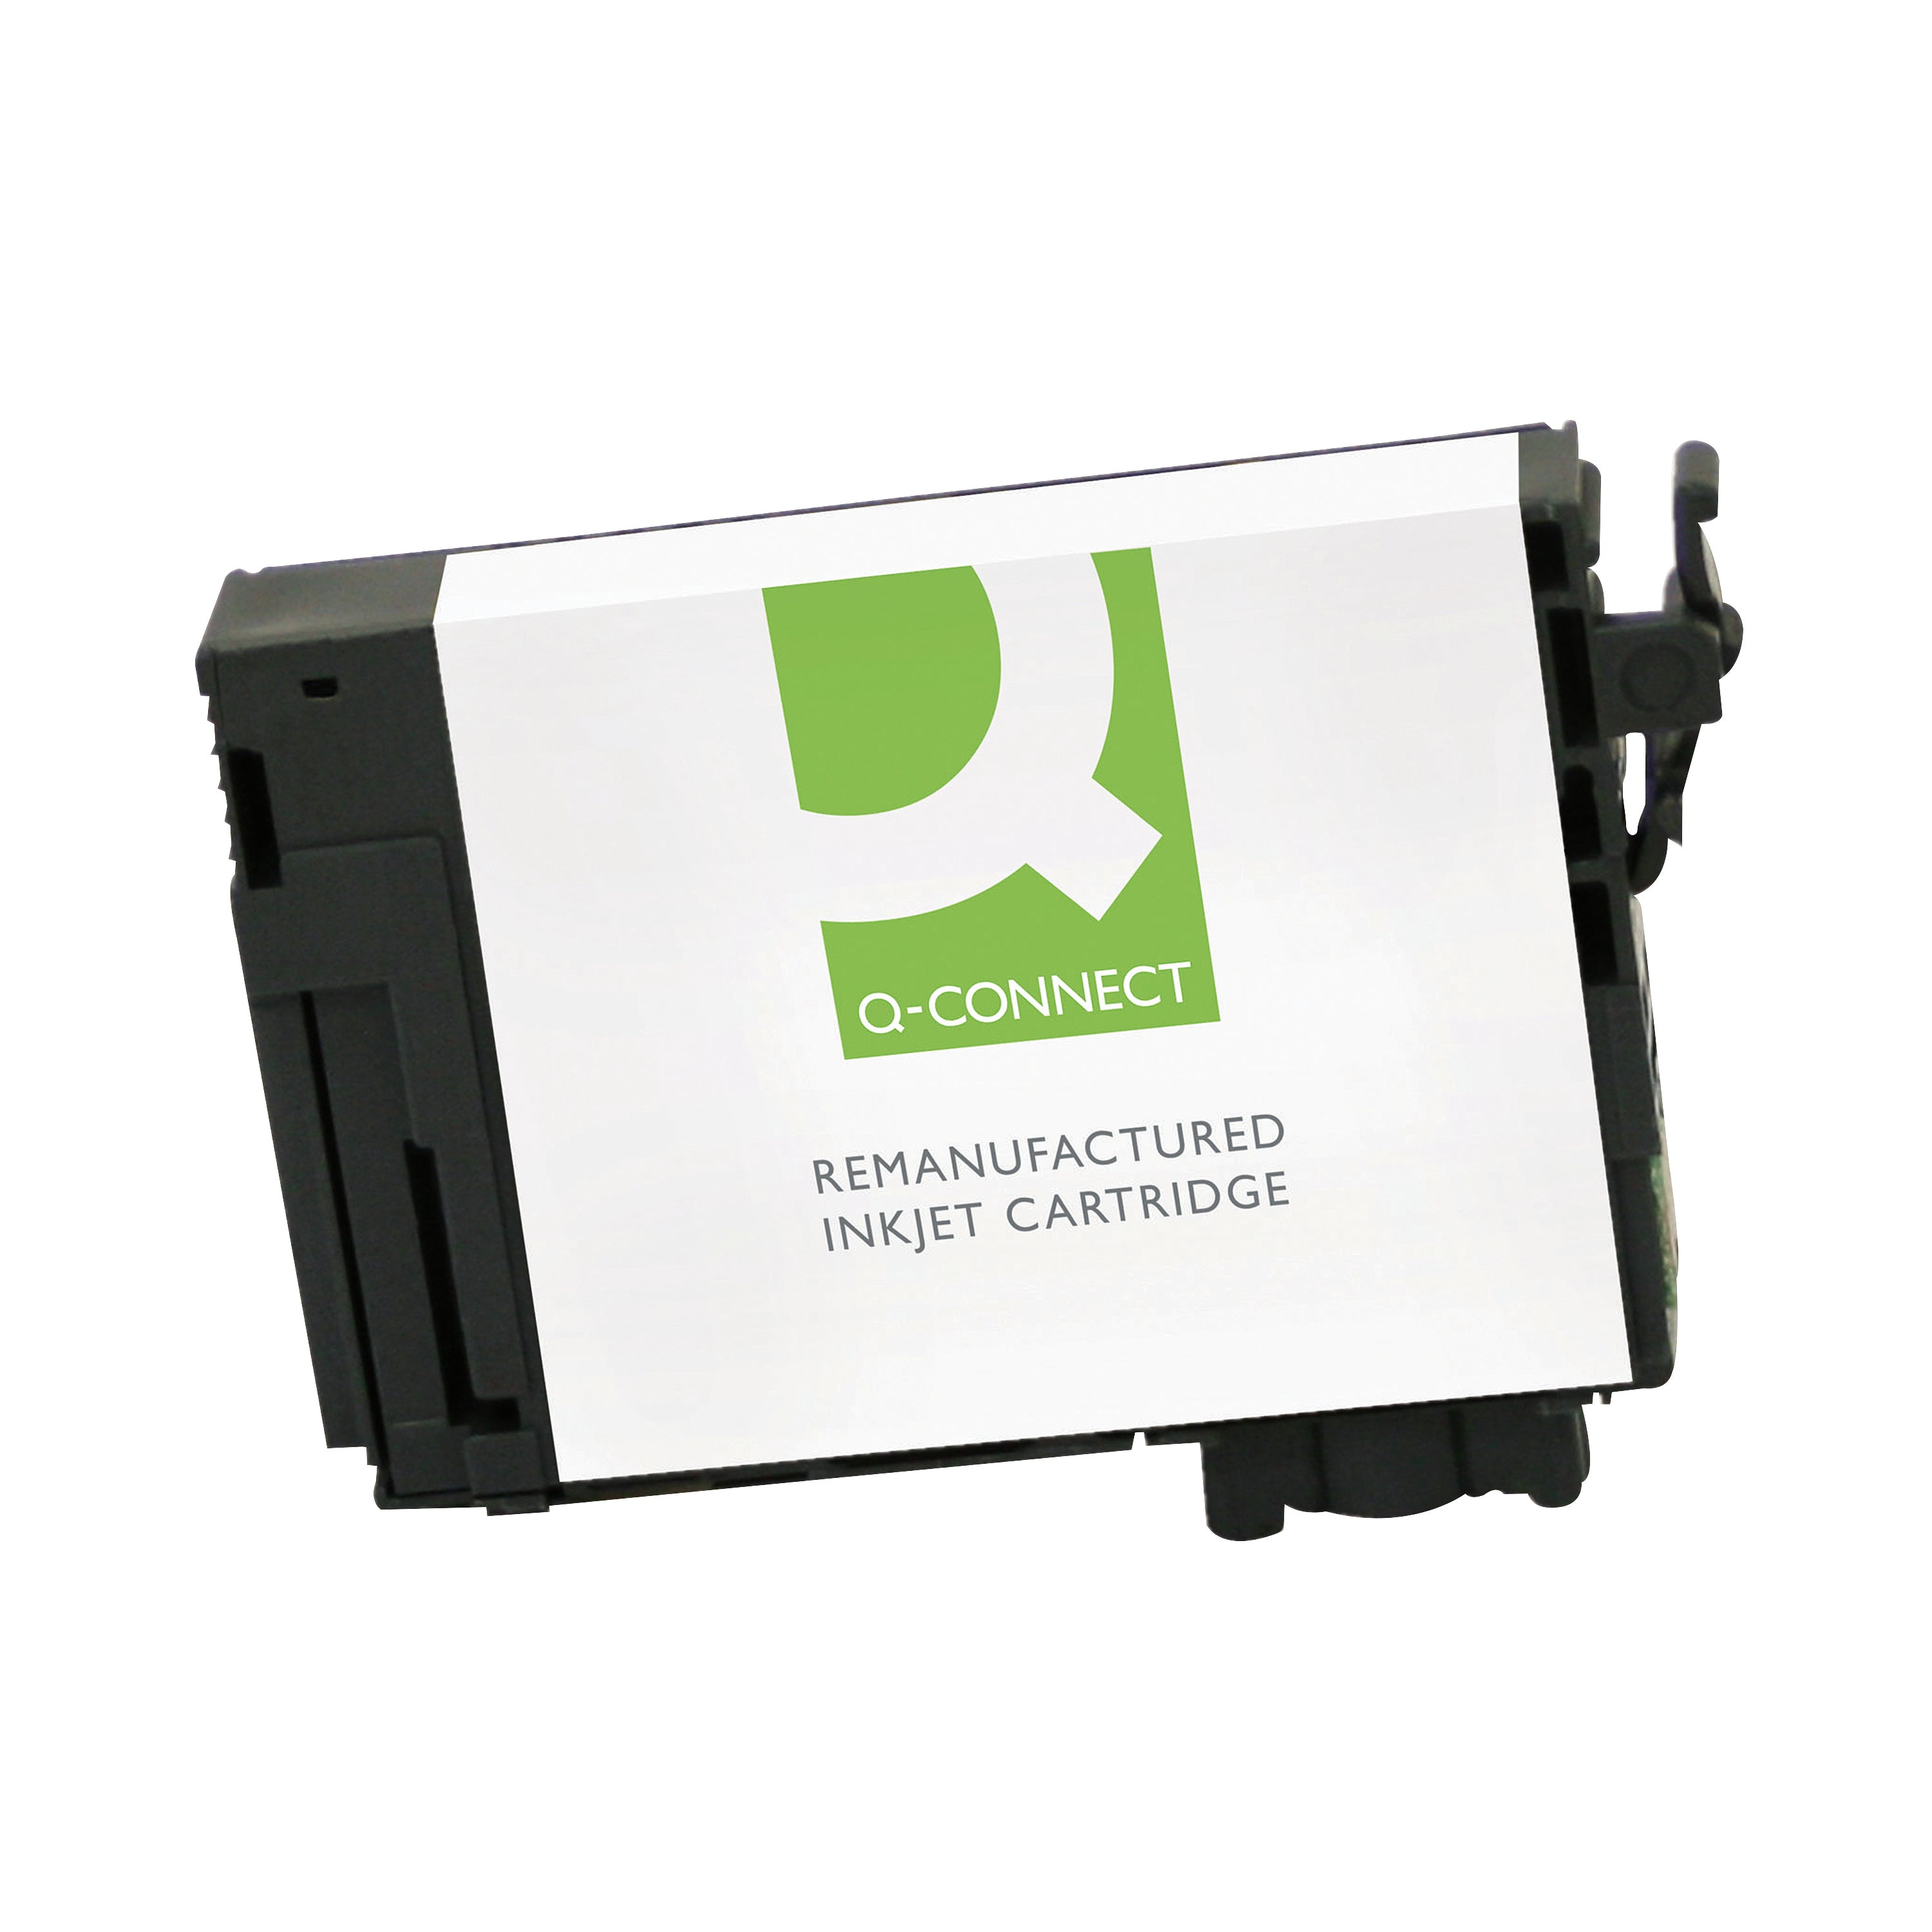 Q-Connect Epson 16XL Remanufactured Cyan Inkjet Cartridge High Yield C13T16324010 / T163240